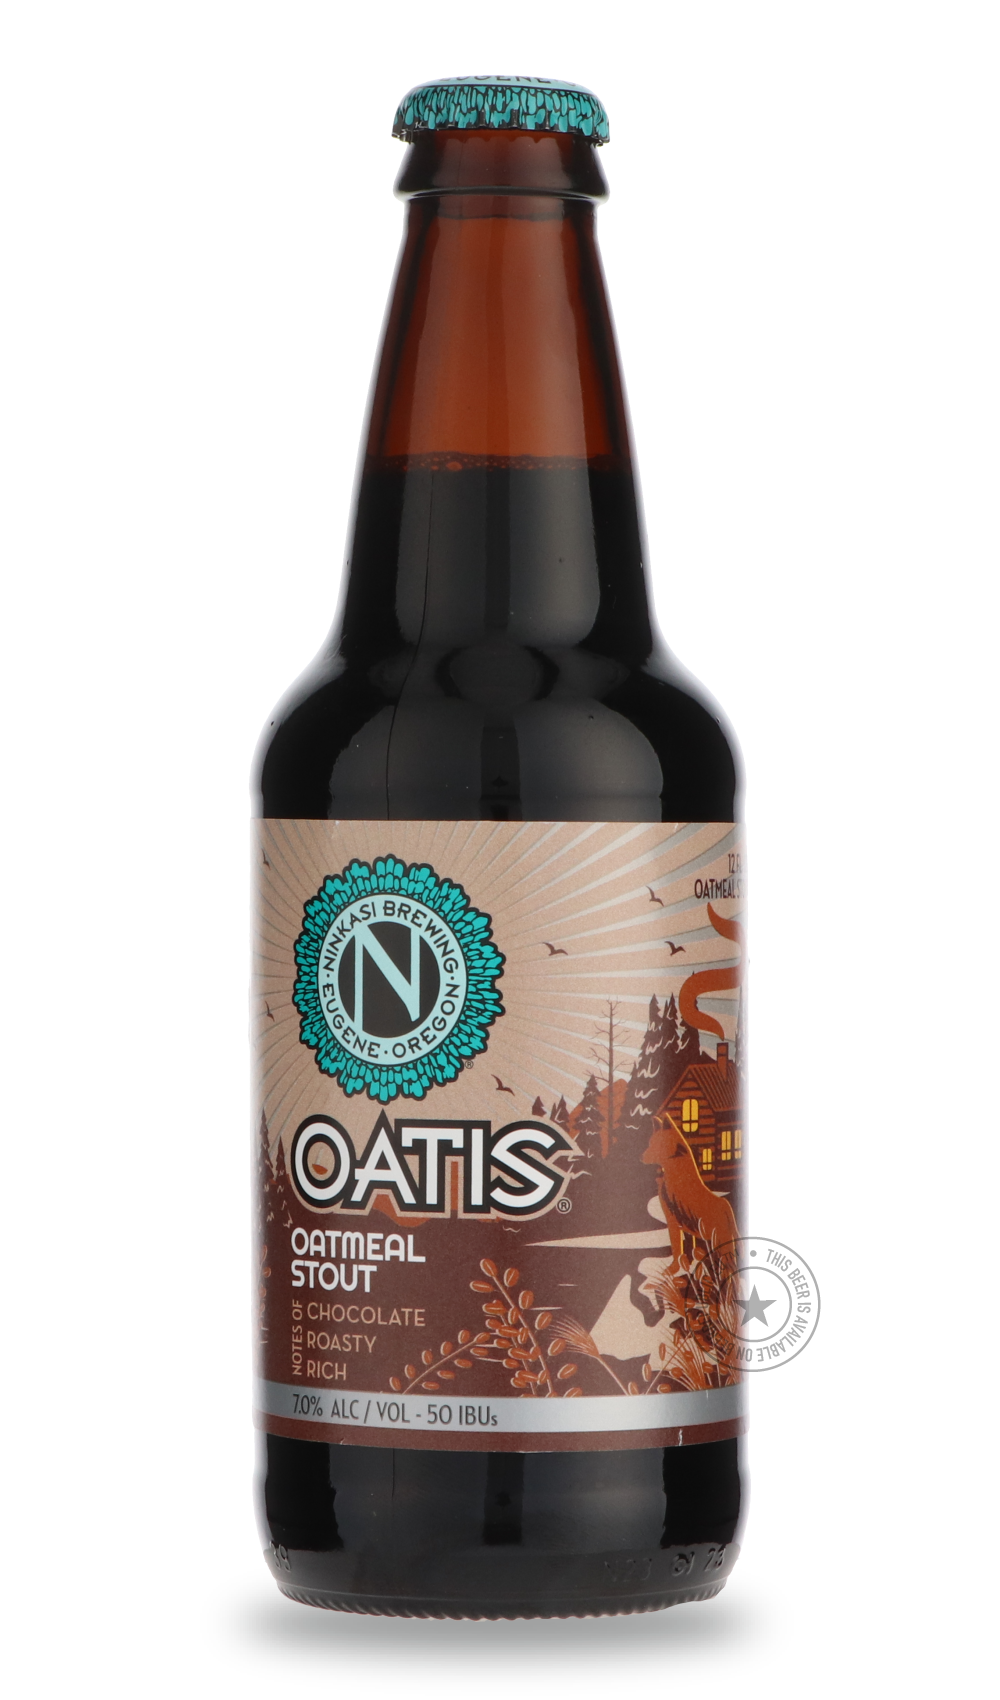 -Ninkasi- Oatis-Stout & Porter- Only @ Beer Republic - The best online beer store for American & Canadian craft beer - Buy beer online from the USA and Canada - Bier online kopen - Amerikaans bier kopen - Craft beer store - Craft beer kopen - Amerikanisch bier kaufen - Bier online kaufen - Acheter biere online - IPA - Stout - Porter - New England IPA - Hazy IPA - Imperial Stout - Barrel Aged - Barrel Aged Imperial Stout - Brown - Dark beer - Blond - Blonde - Pilsner - Lager - Wheat - Weizen - Amber - Barley